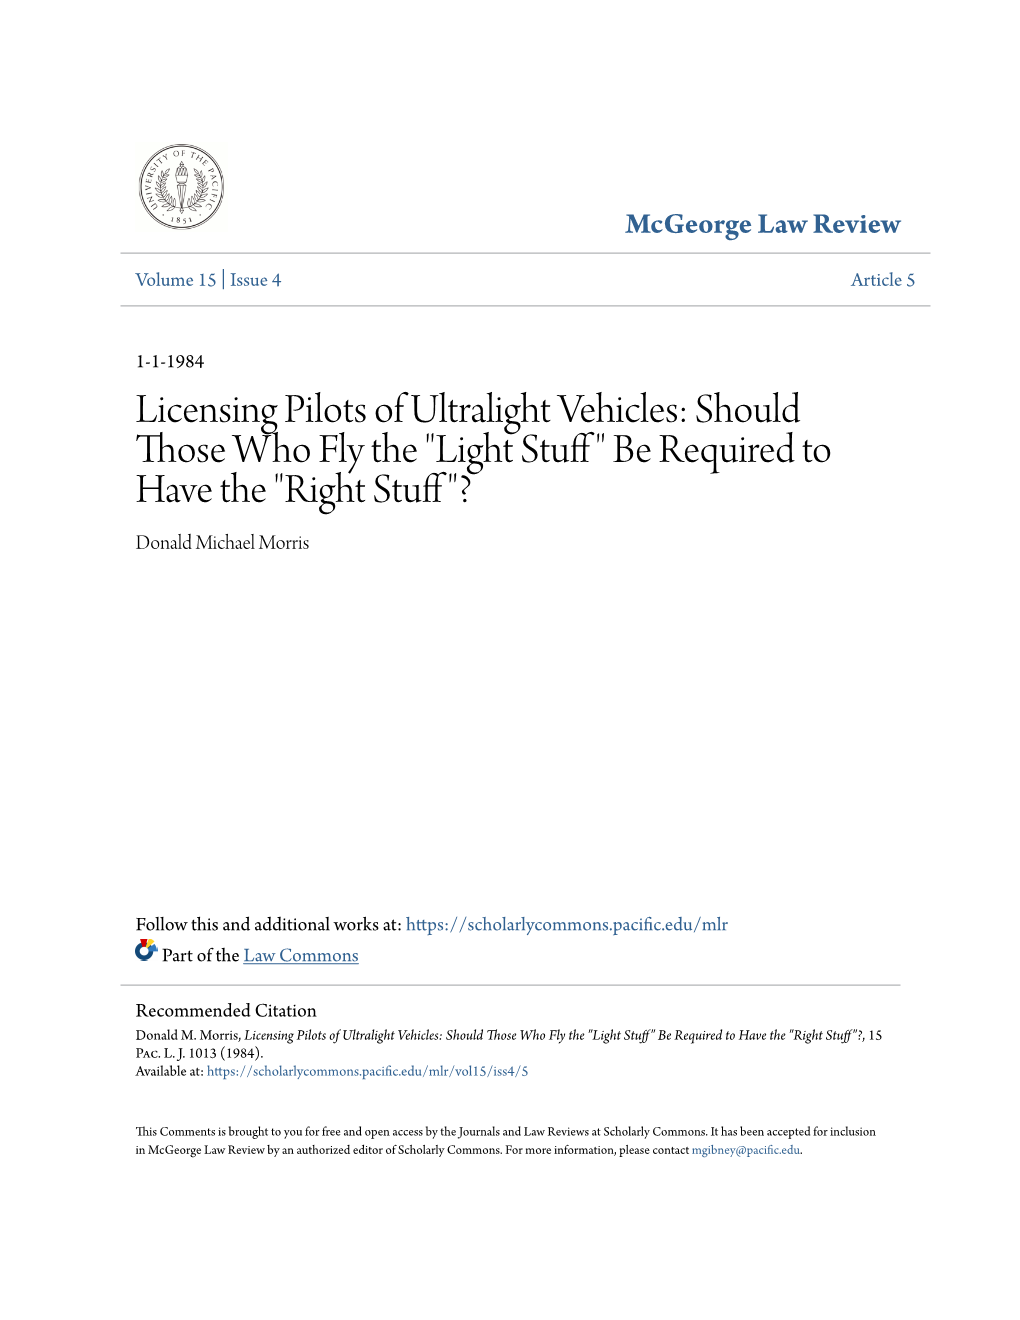 Licensing Pilots of Ultralight Vehicles: Should Those Who Fly the "Light Stuff " Be Required to Have the "Right Stuff "? Donald Michael Morris